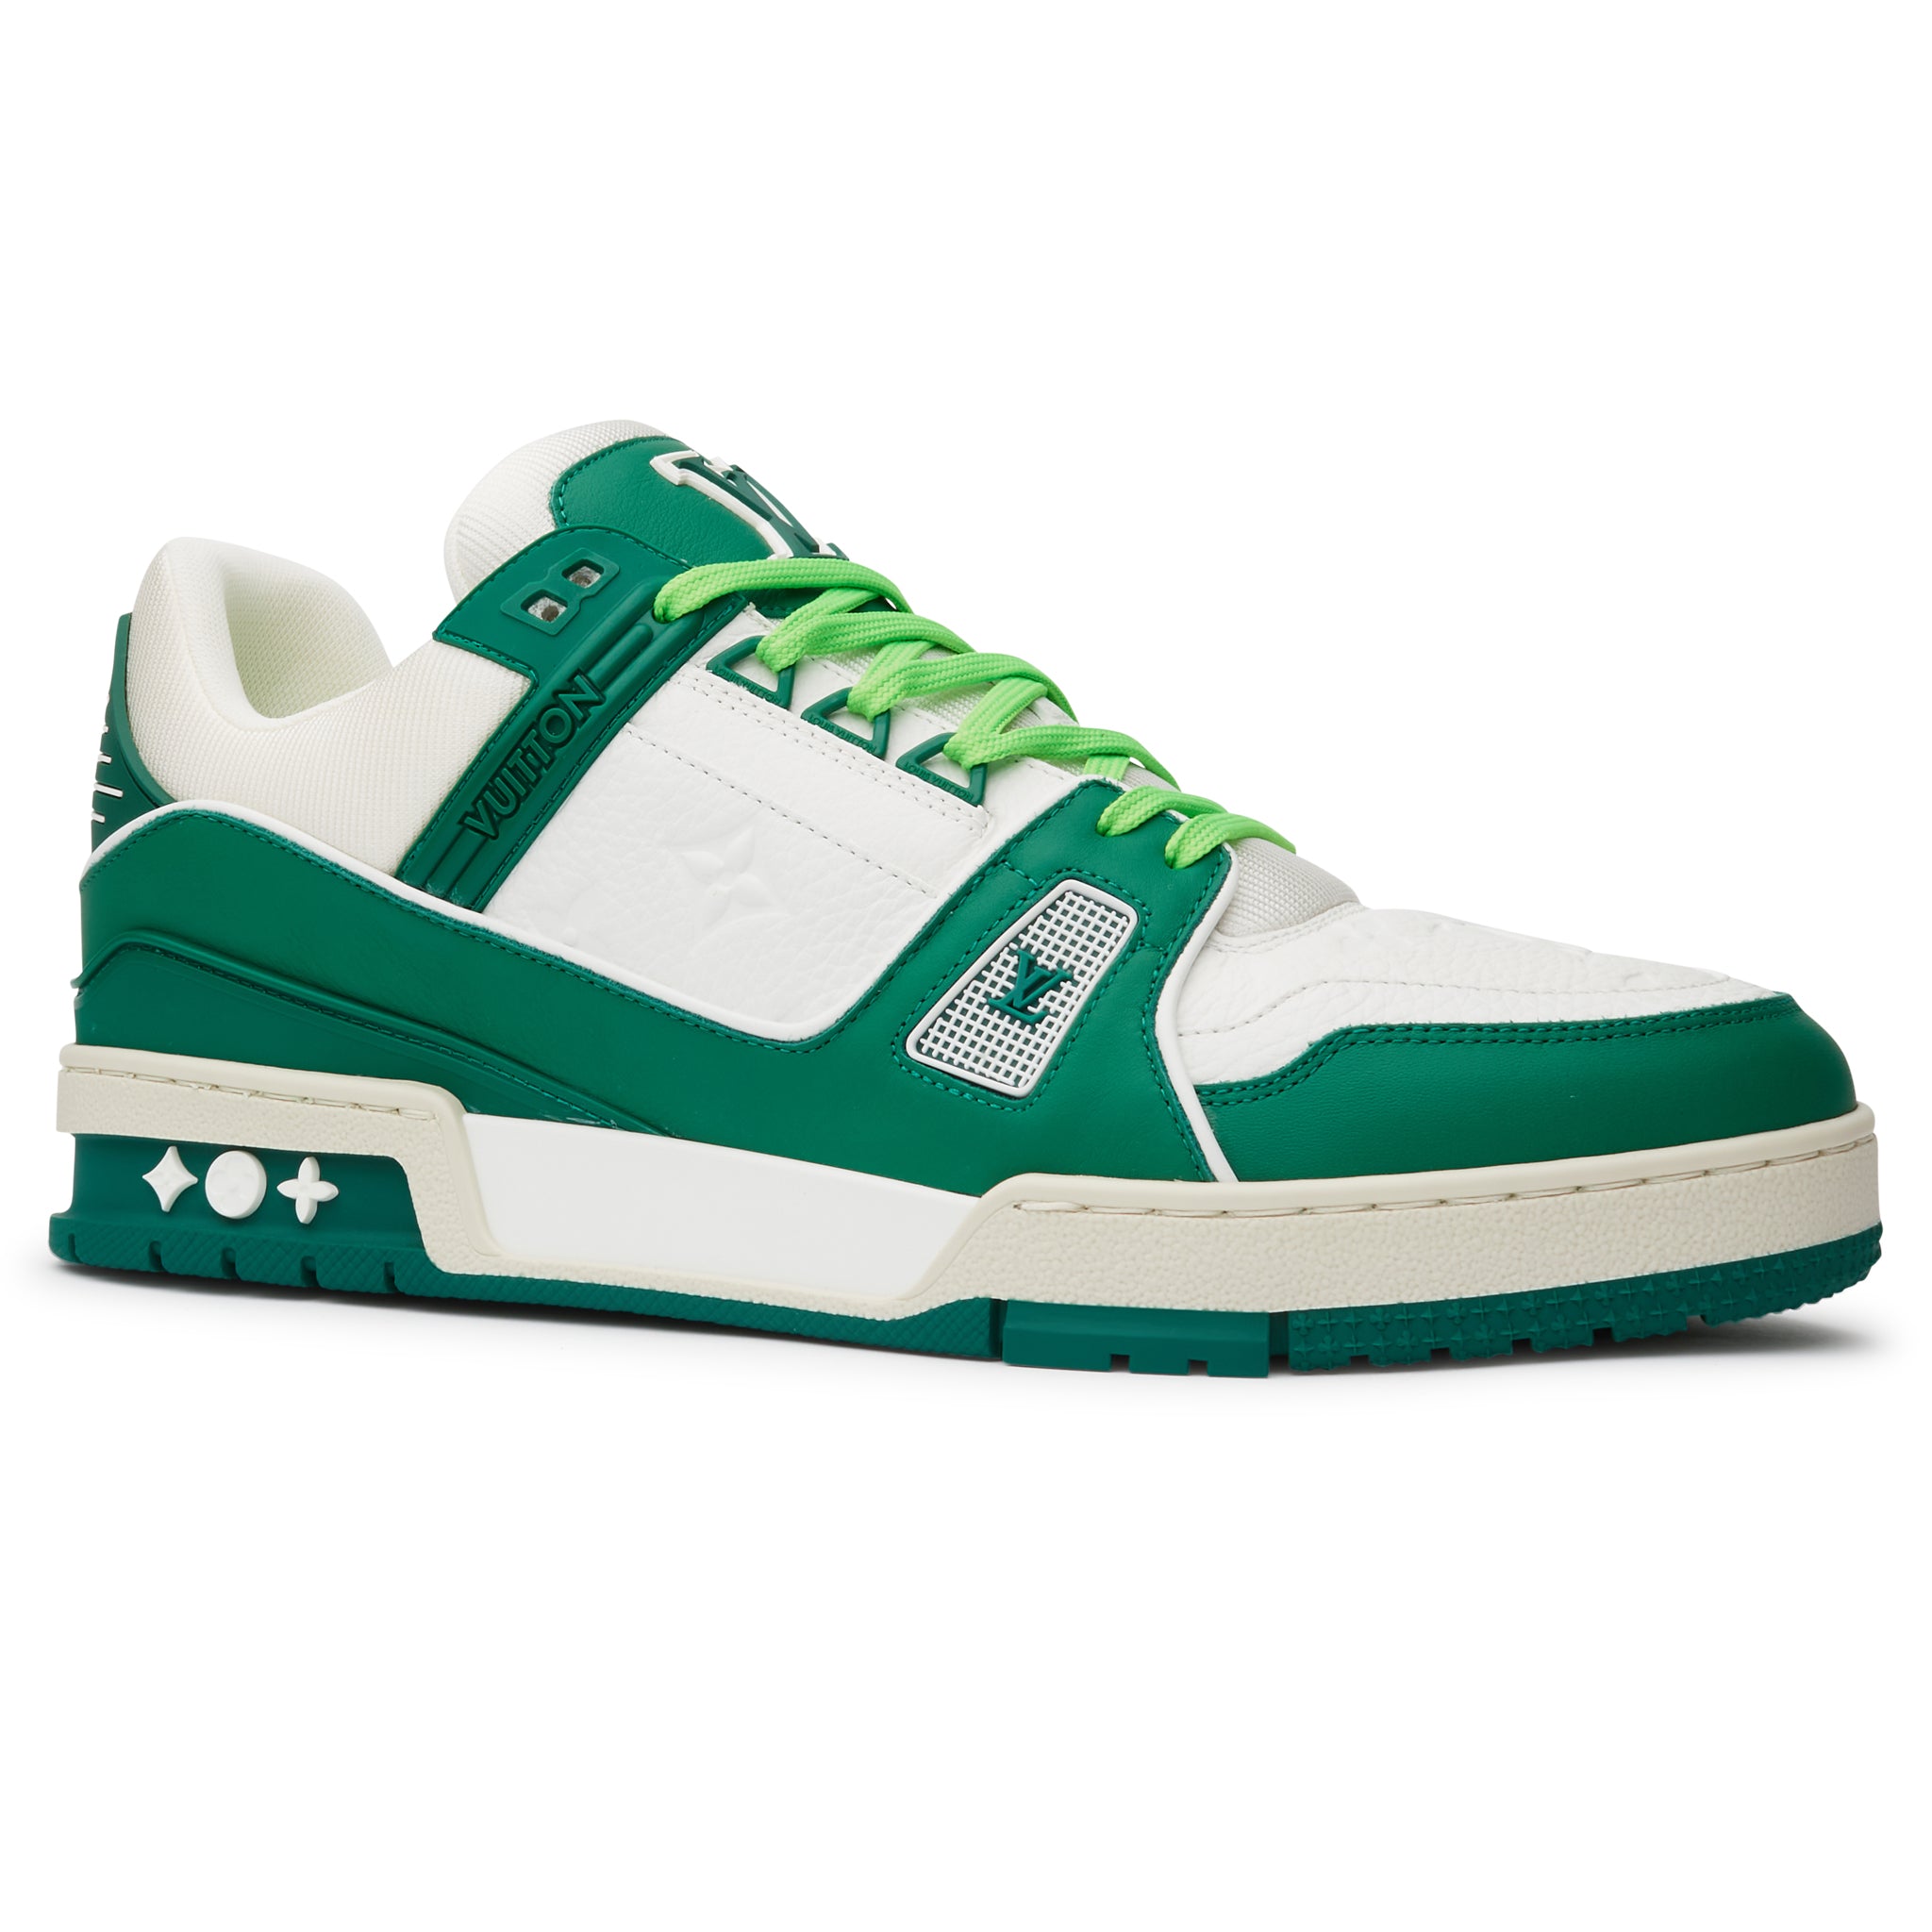 Image of Louis Vuitton LV Trainer White Green Sneaker